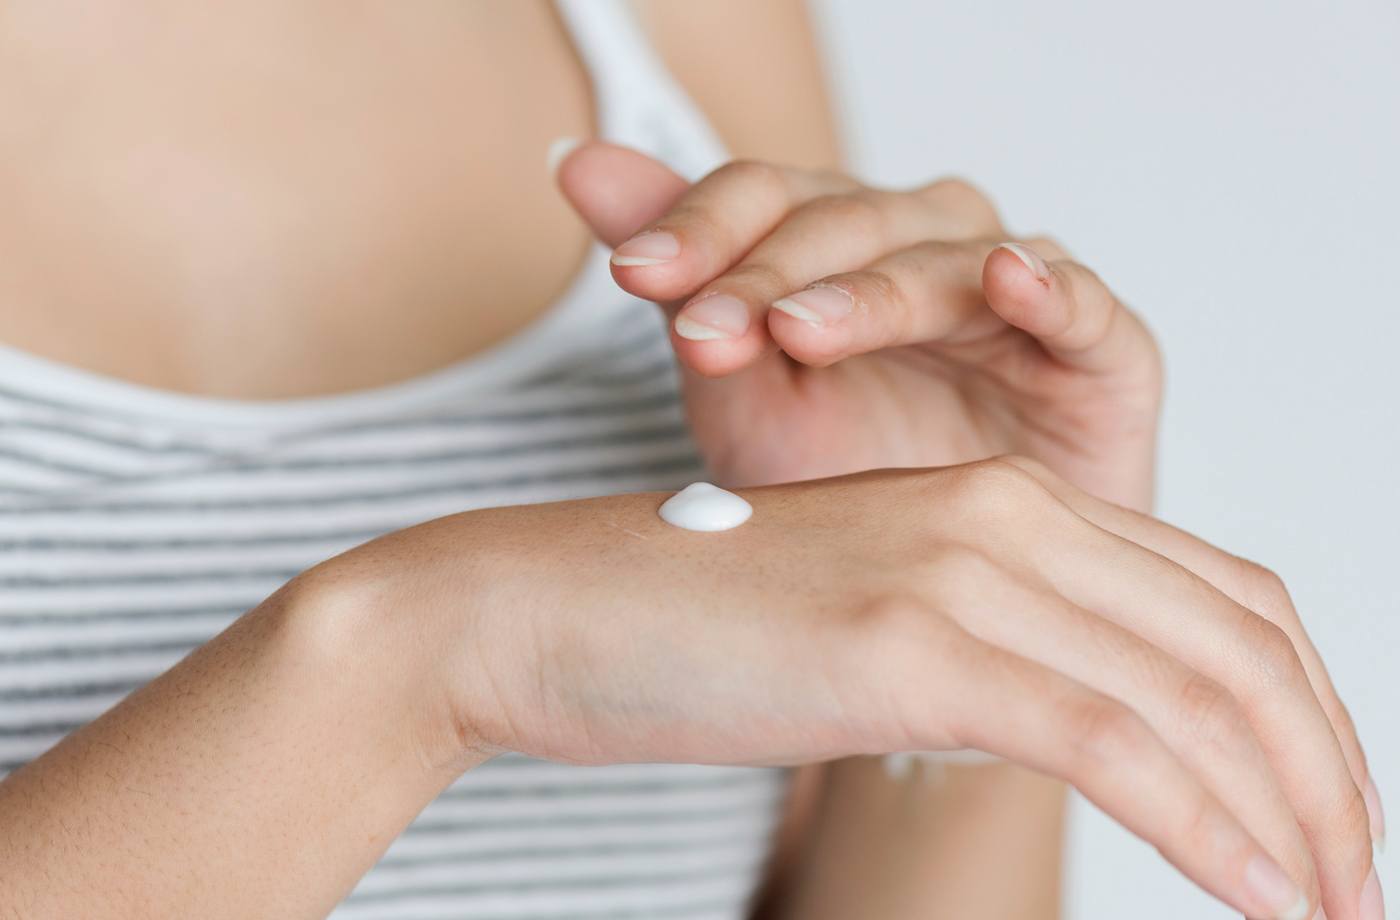 4 editor-approved anti-itch remedies to heal your dry skin, stat